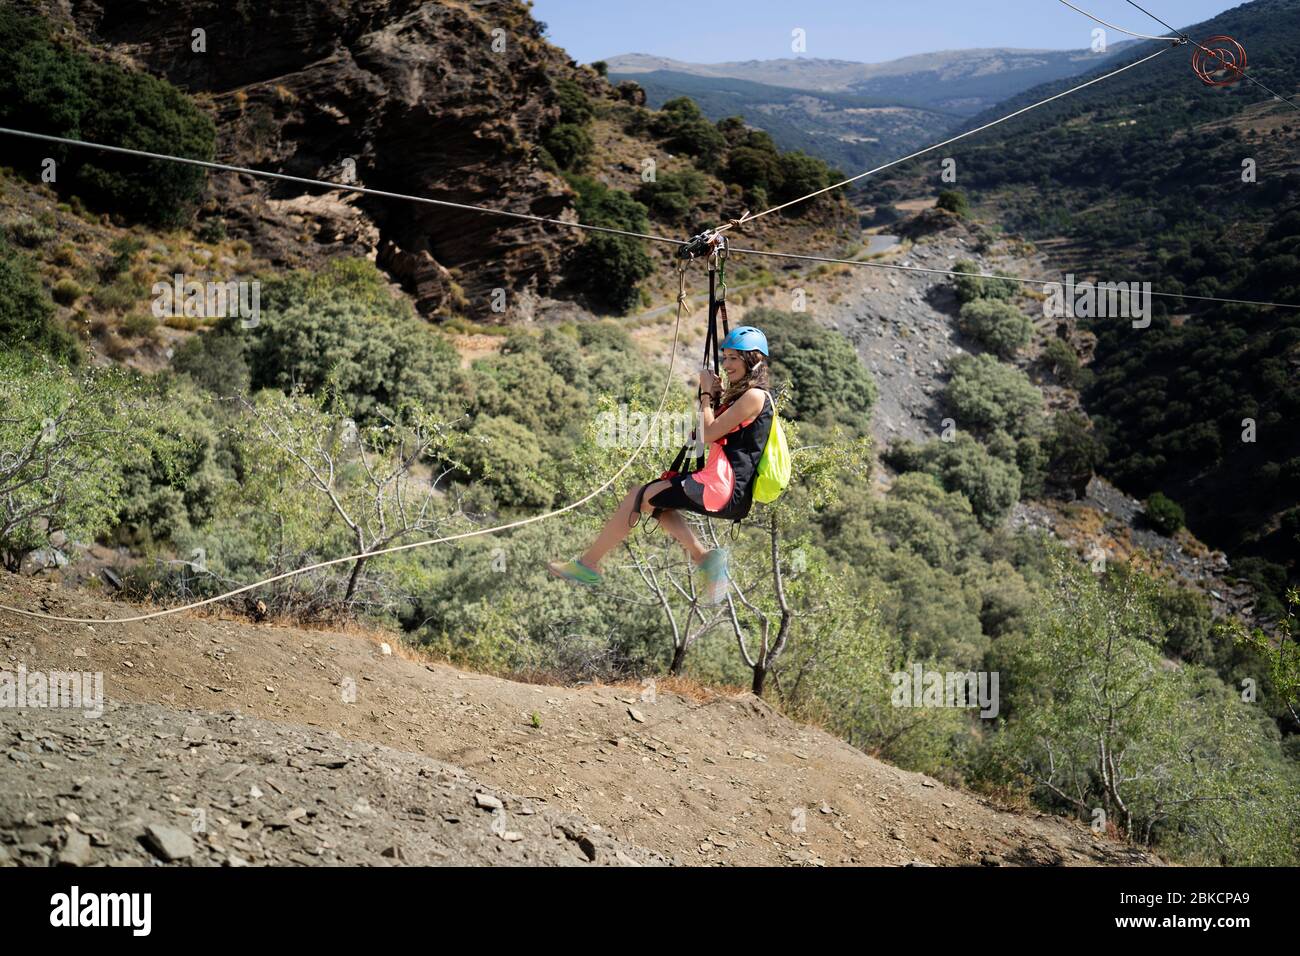 Woman hanging on a rope-way. Zip line is an exciting adventure activity. Tourists ride on the Zip line through the mountain. Stock Photo